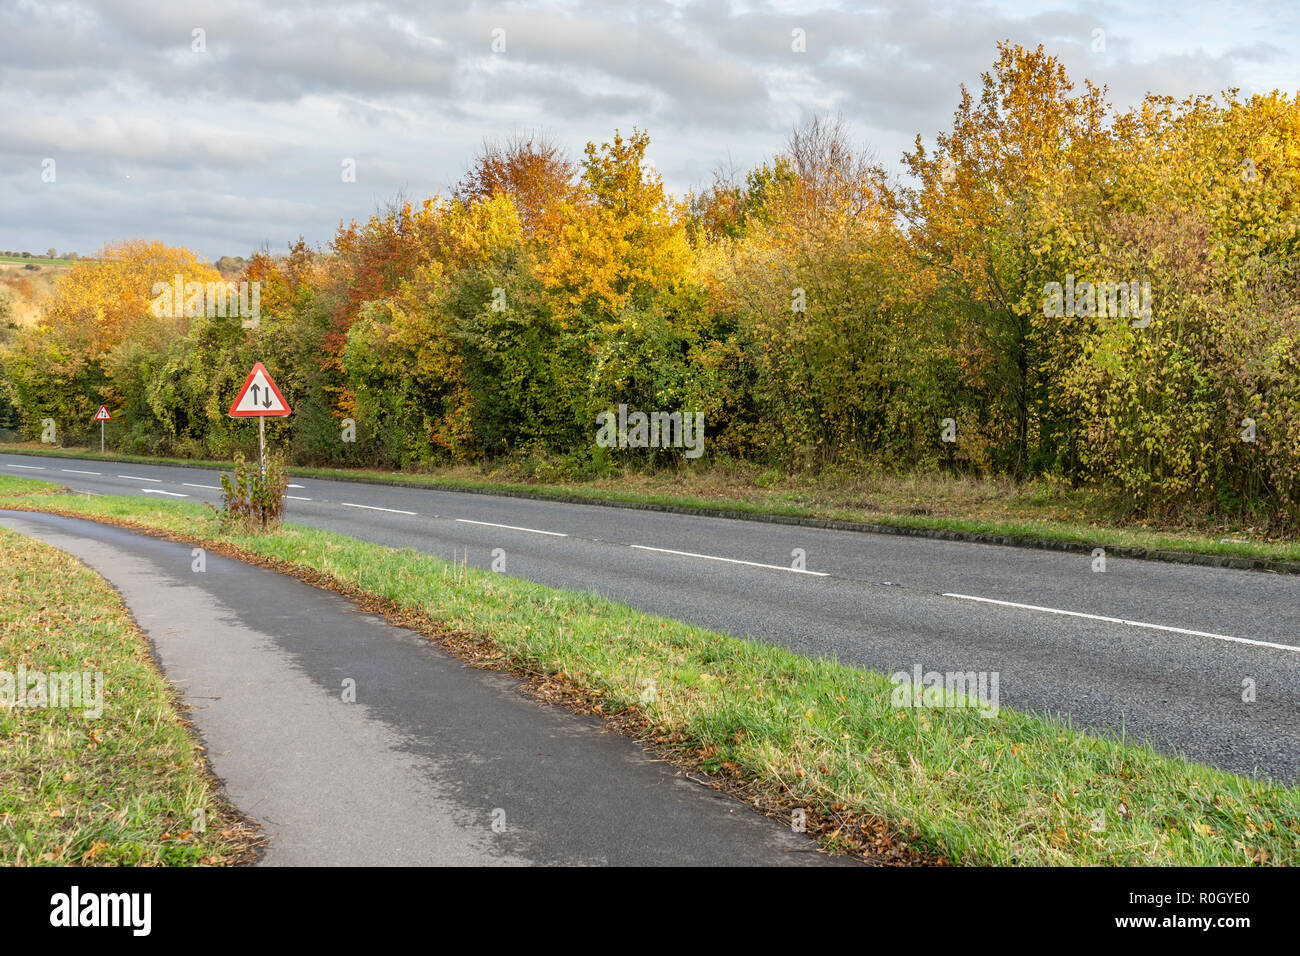 Two way traffic ahead road sign on a UK road during autumn, England, UK Stock Photo